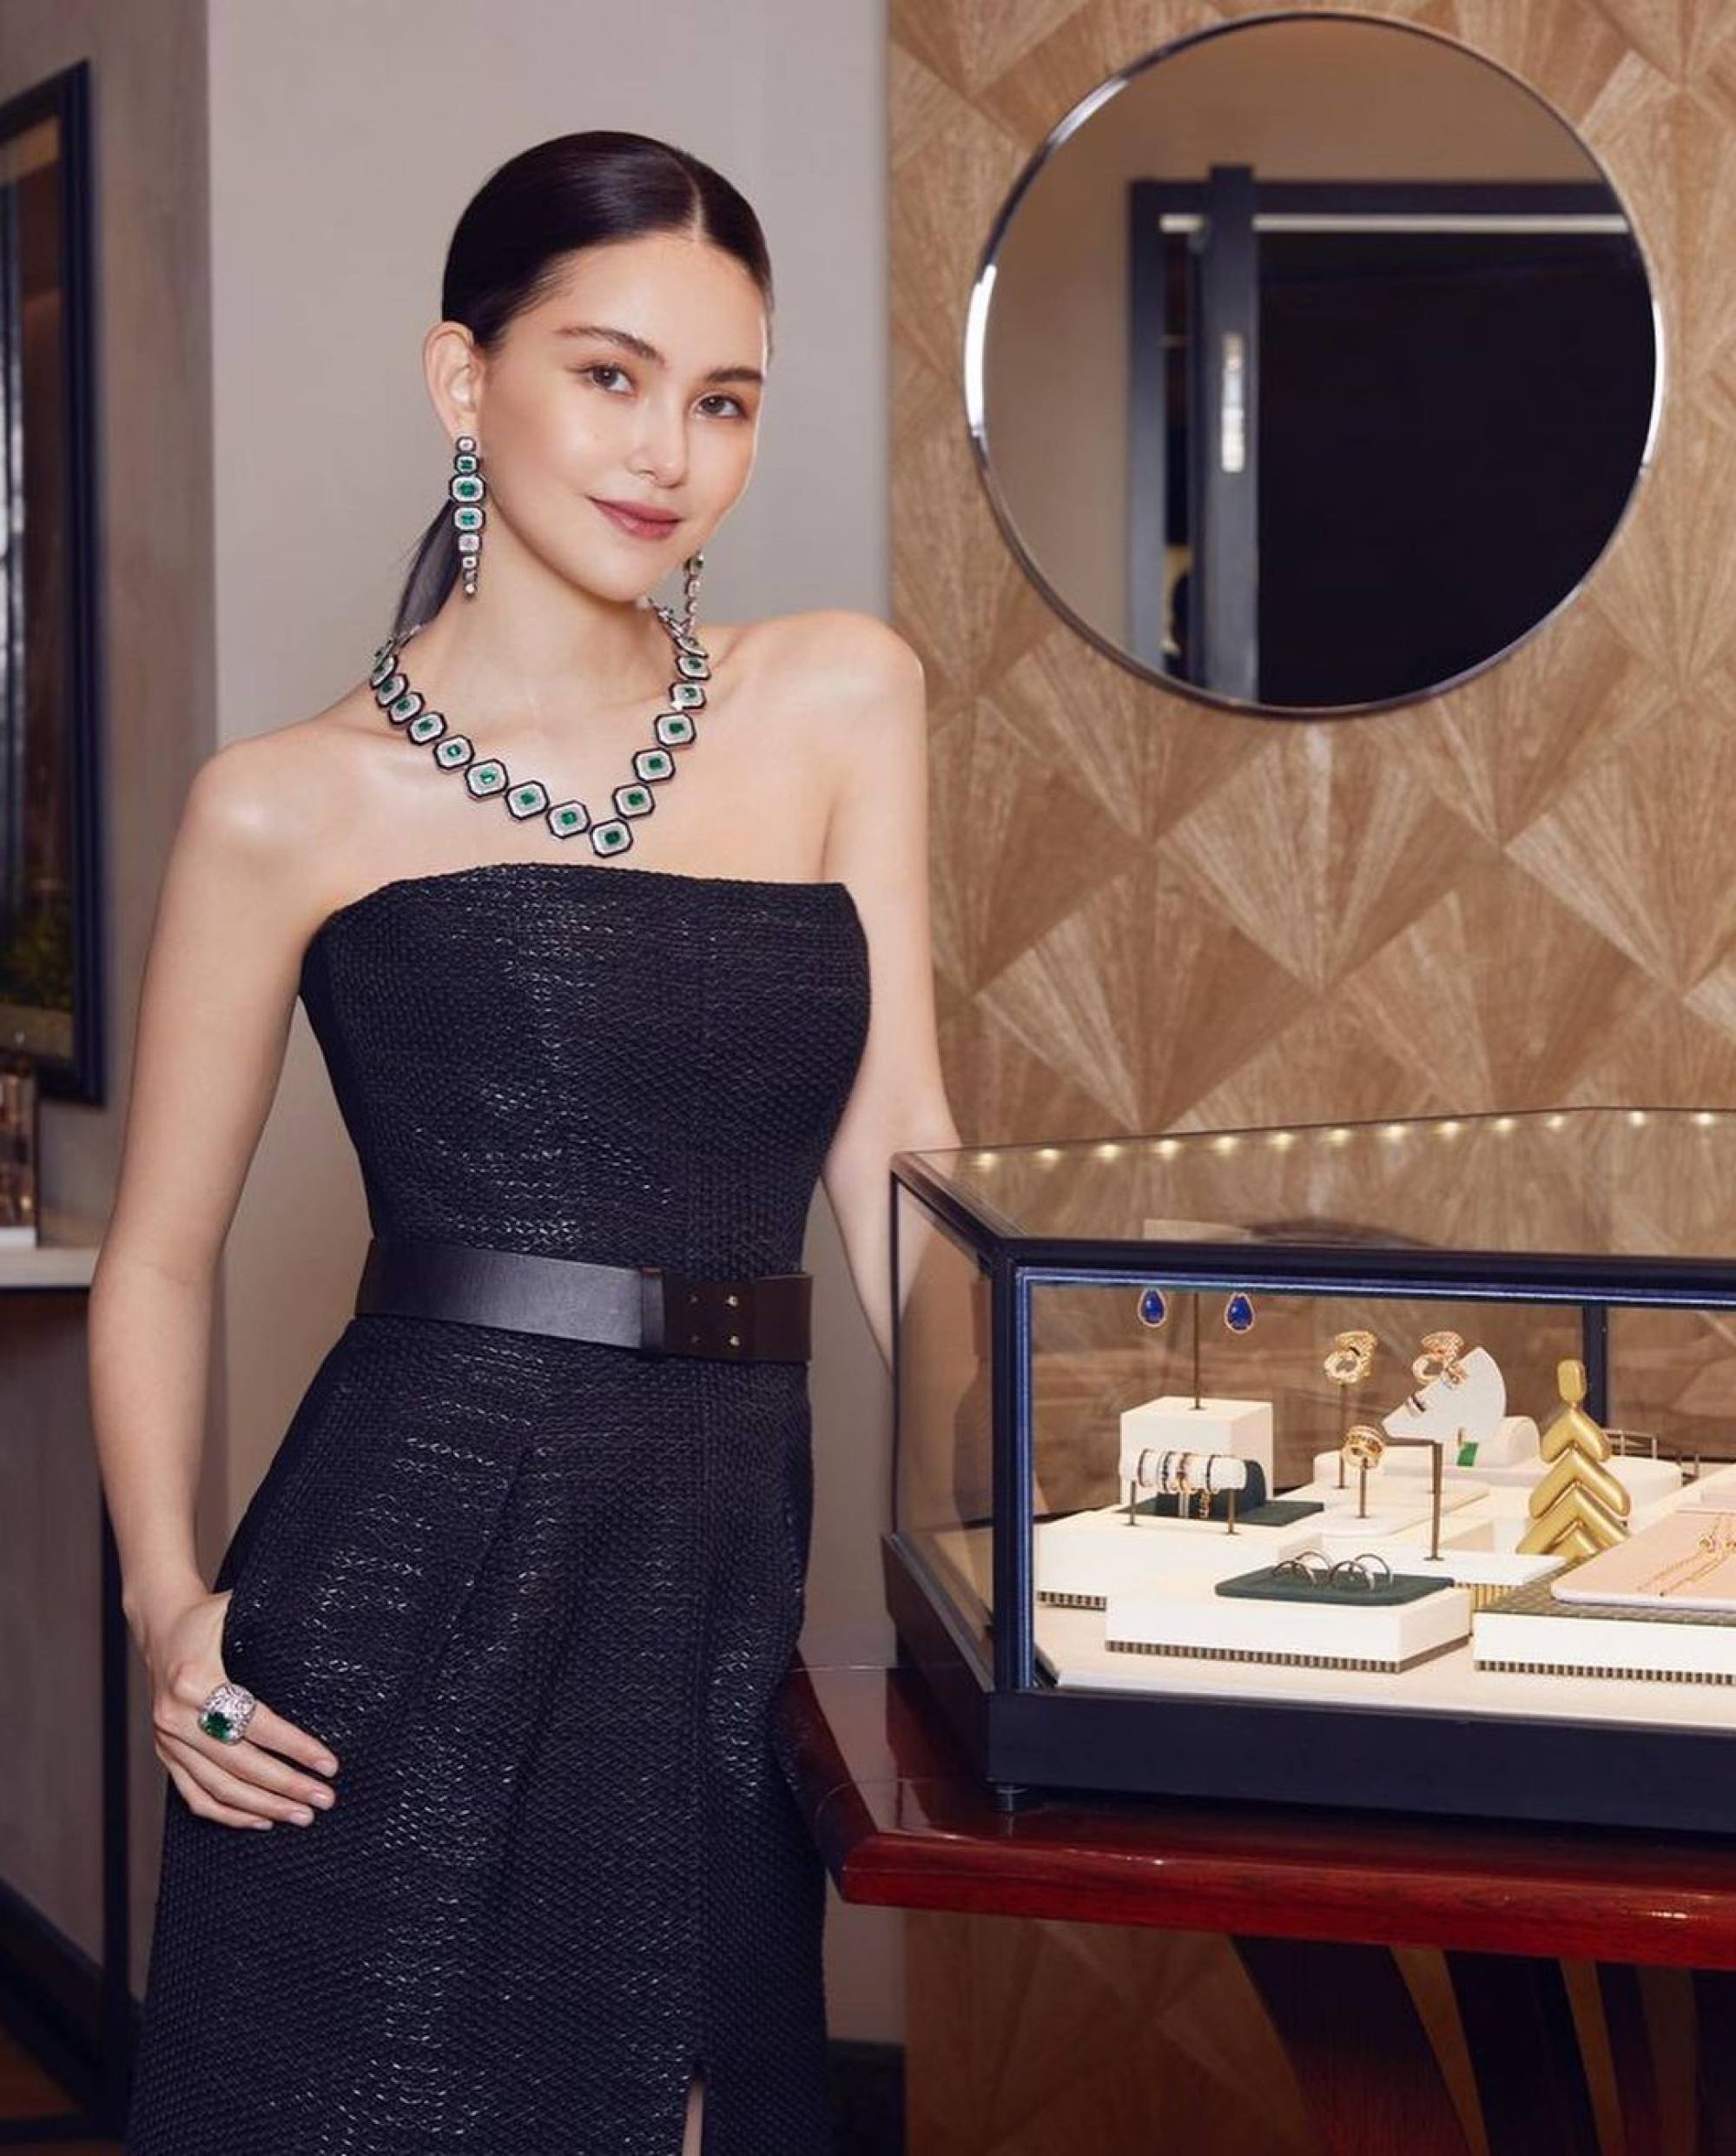 All of Eileen Gu's million-dollar brand collaborations and endorsements